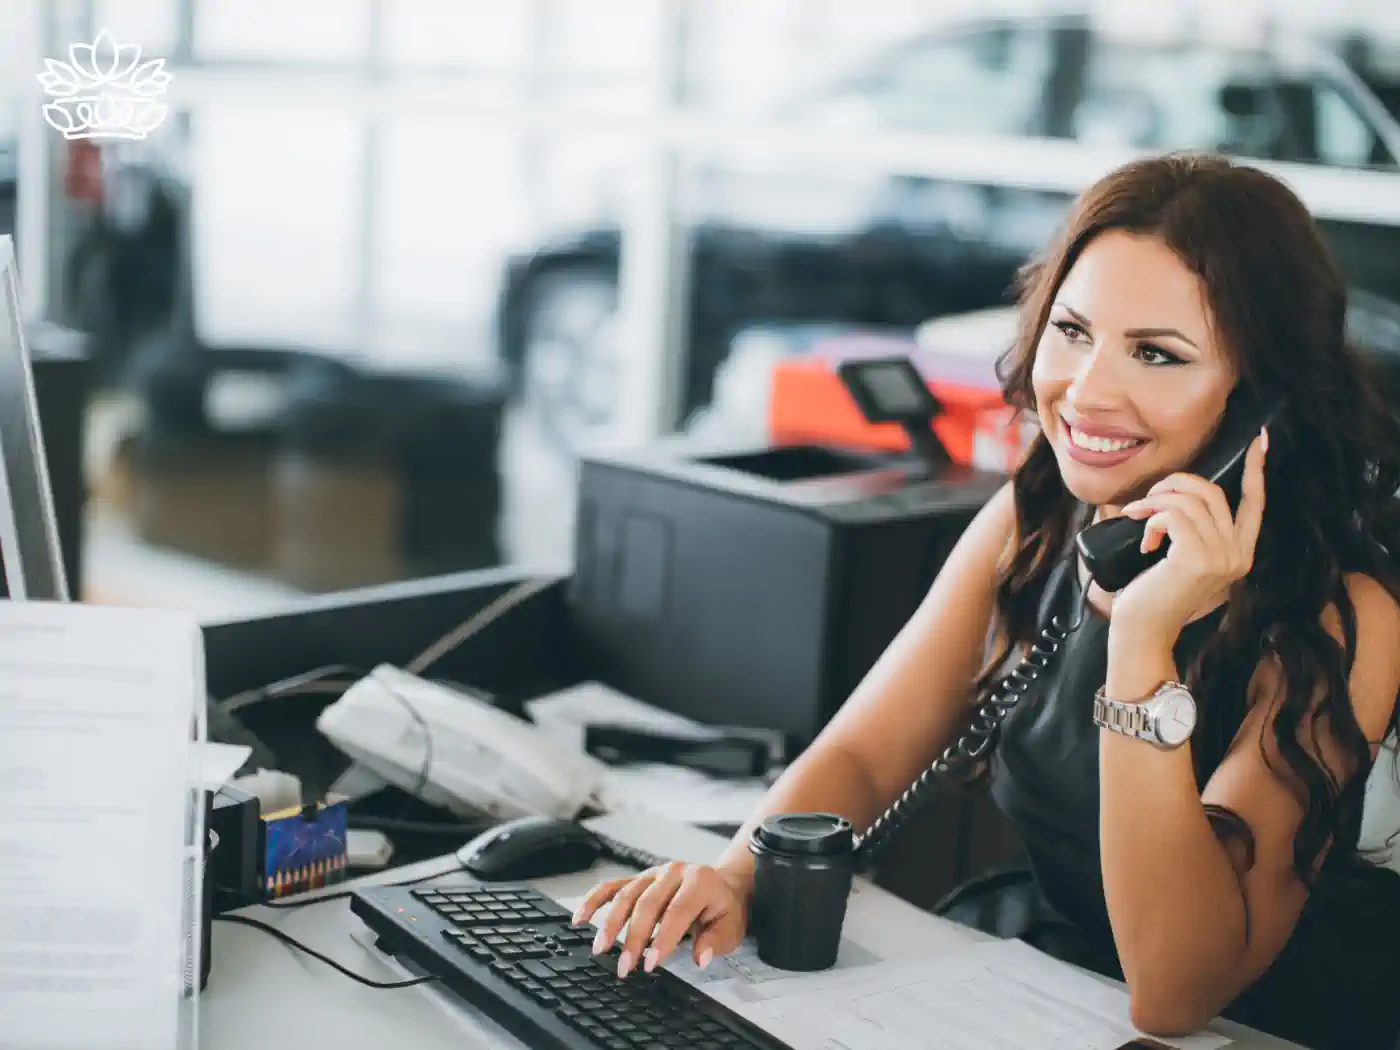 Cheerful secretary with long brunette hair engaging in a phone conversation while working at her desk in a bright automotive dealership office, exemplifying professional dedication.